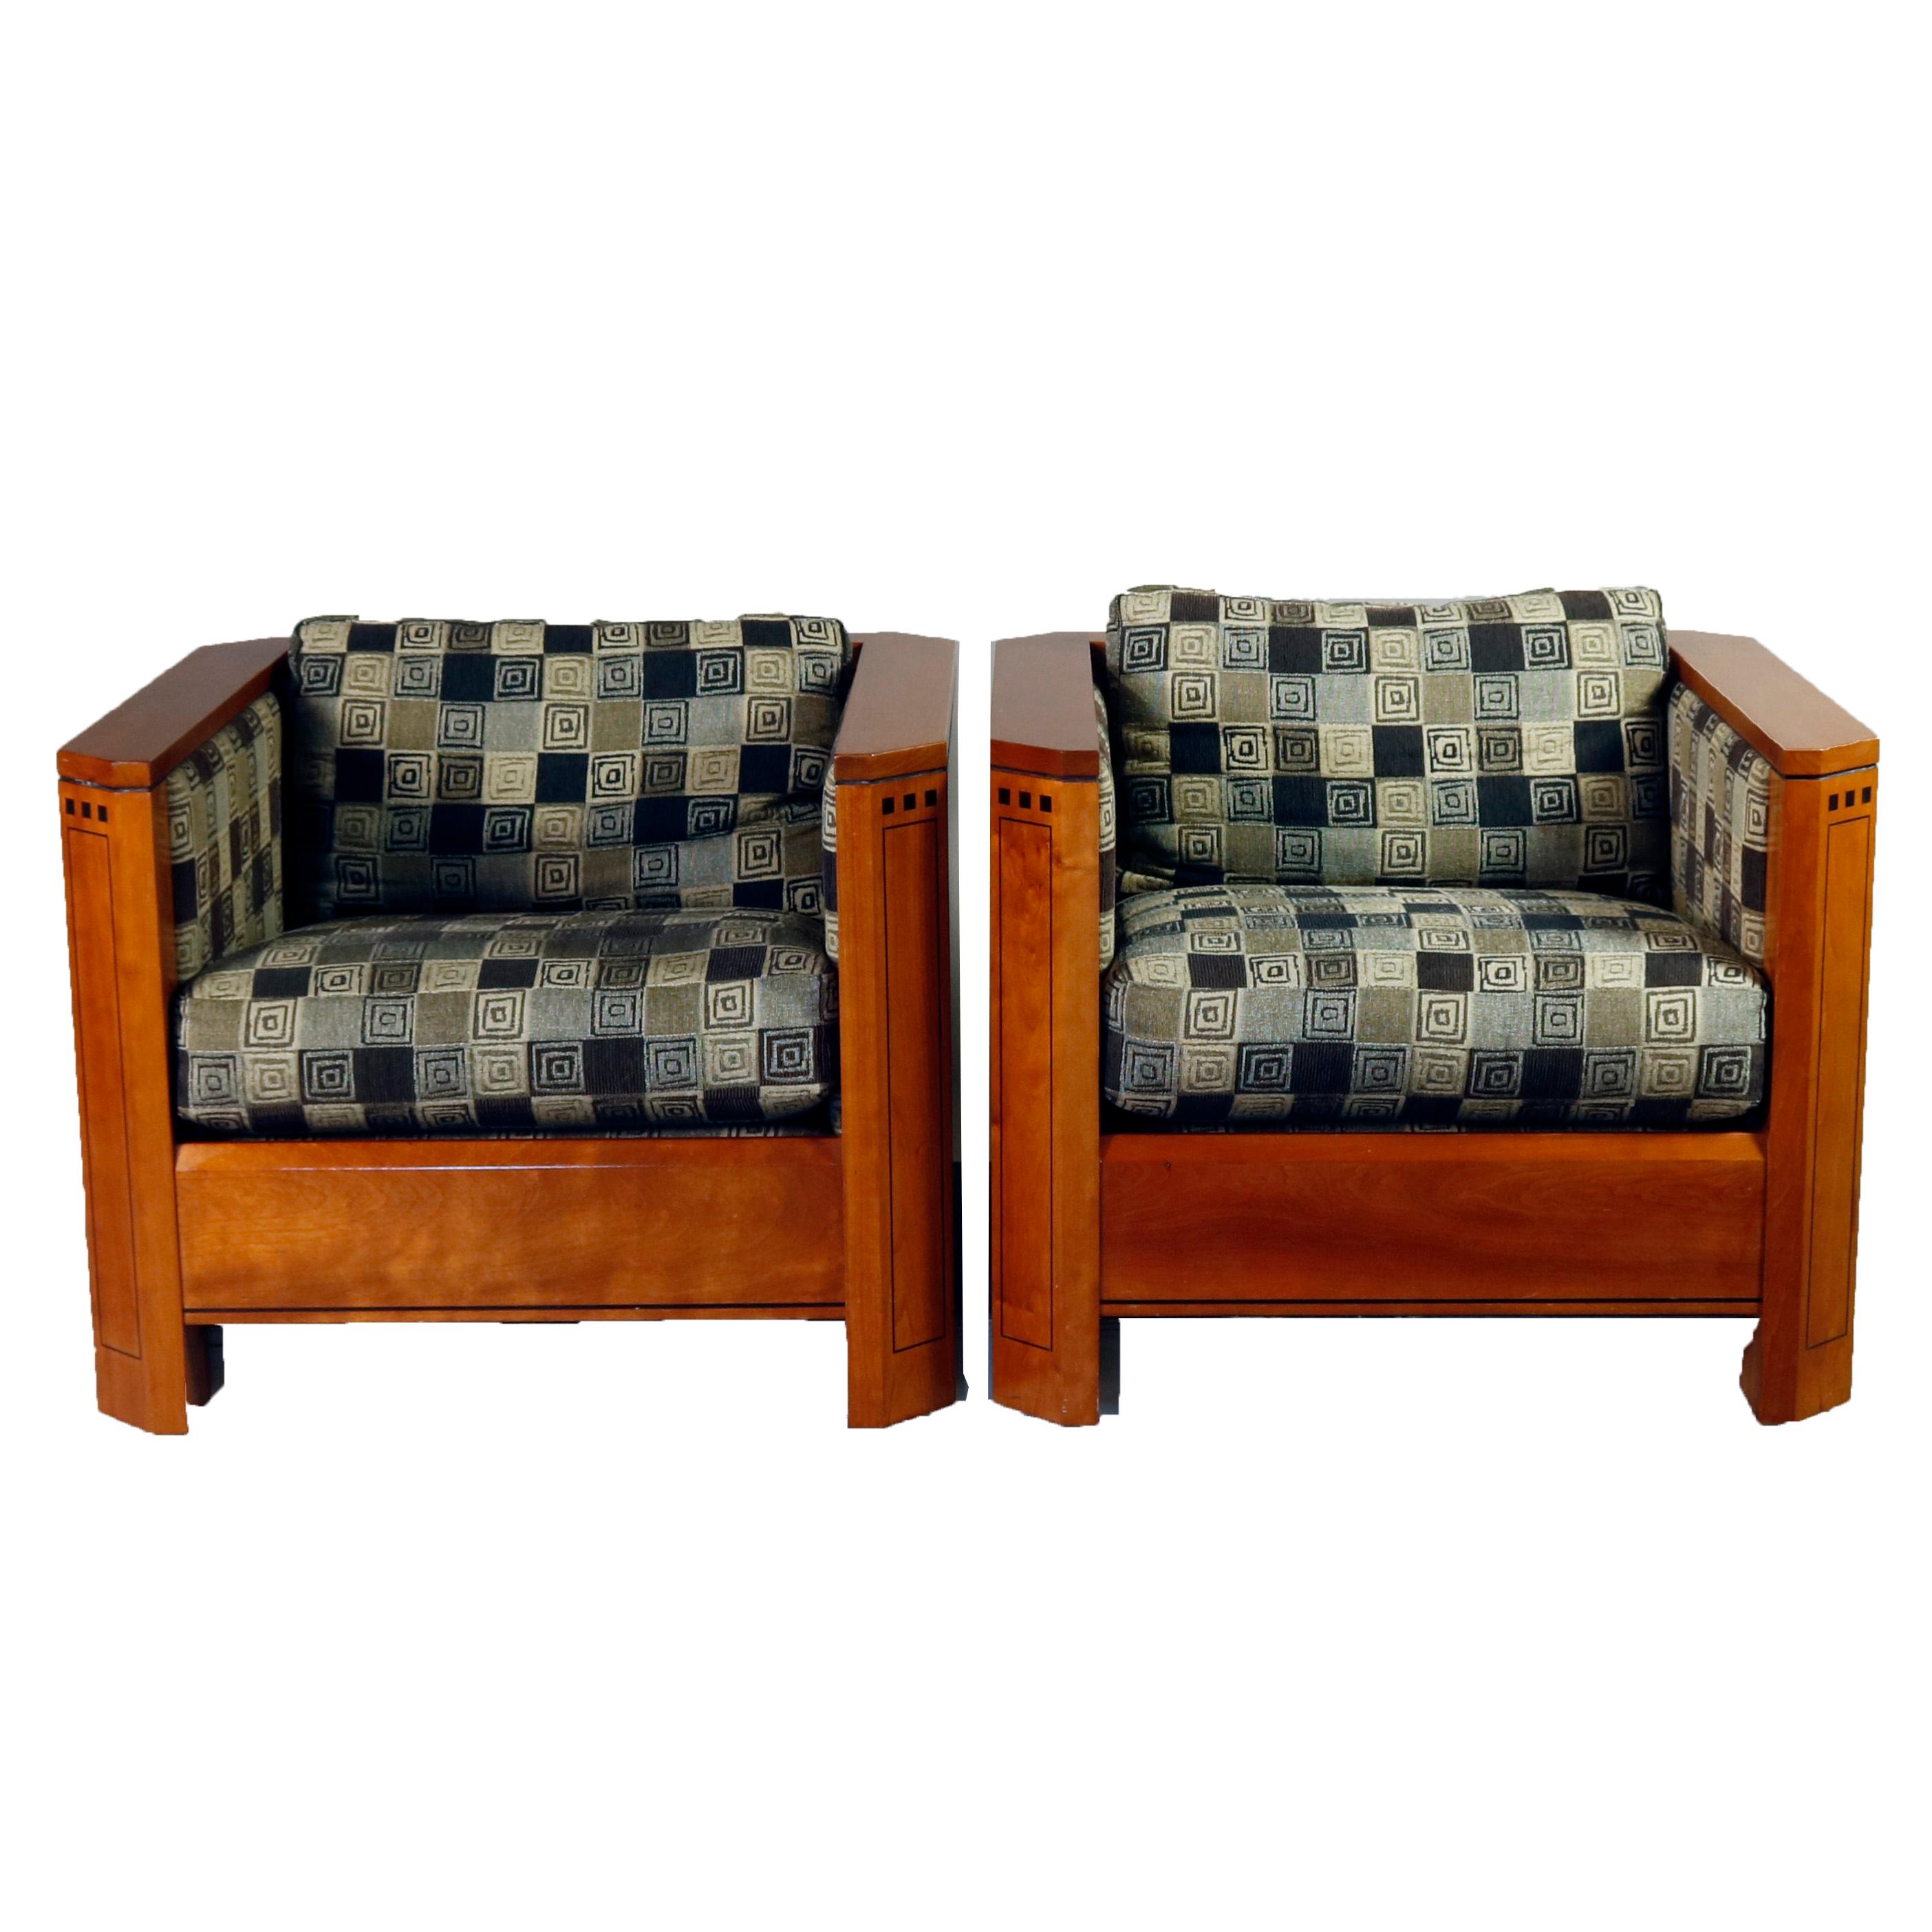 Pair of Frank Lloyd Wright Prairie School Arts & Crafts style cube chairs feature cherry construction with clip corner arms having ebonized banding and architectural inlay, upholstered seats and backs with geometric pattern, original labels, 20th